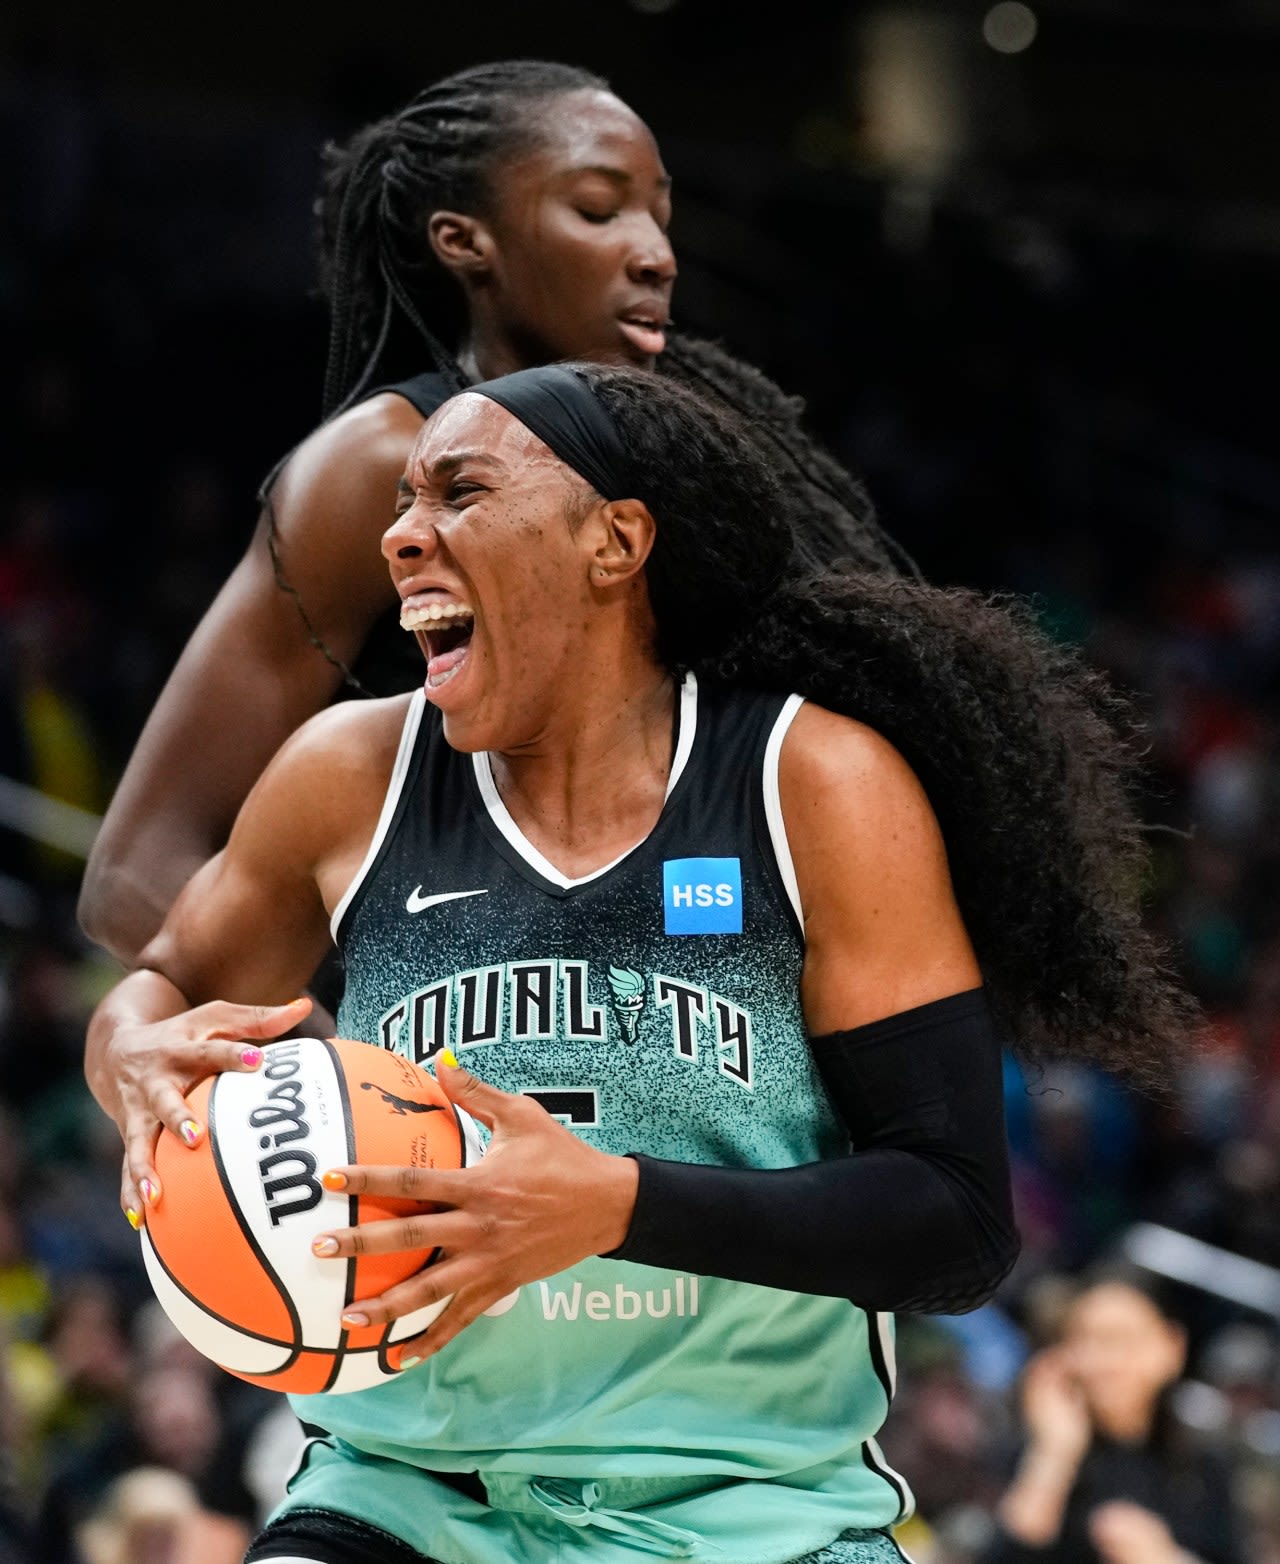 Two WNBA players were among a dozen Americans who played in Russia after Brittney Griner’s arrest